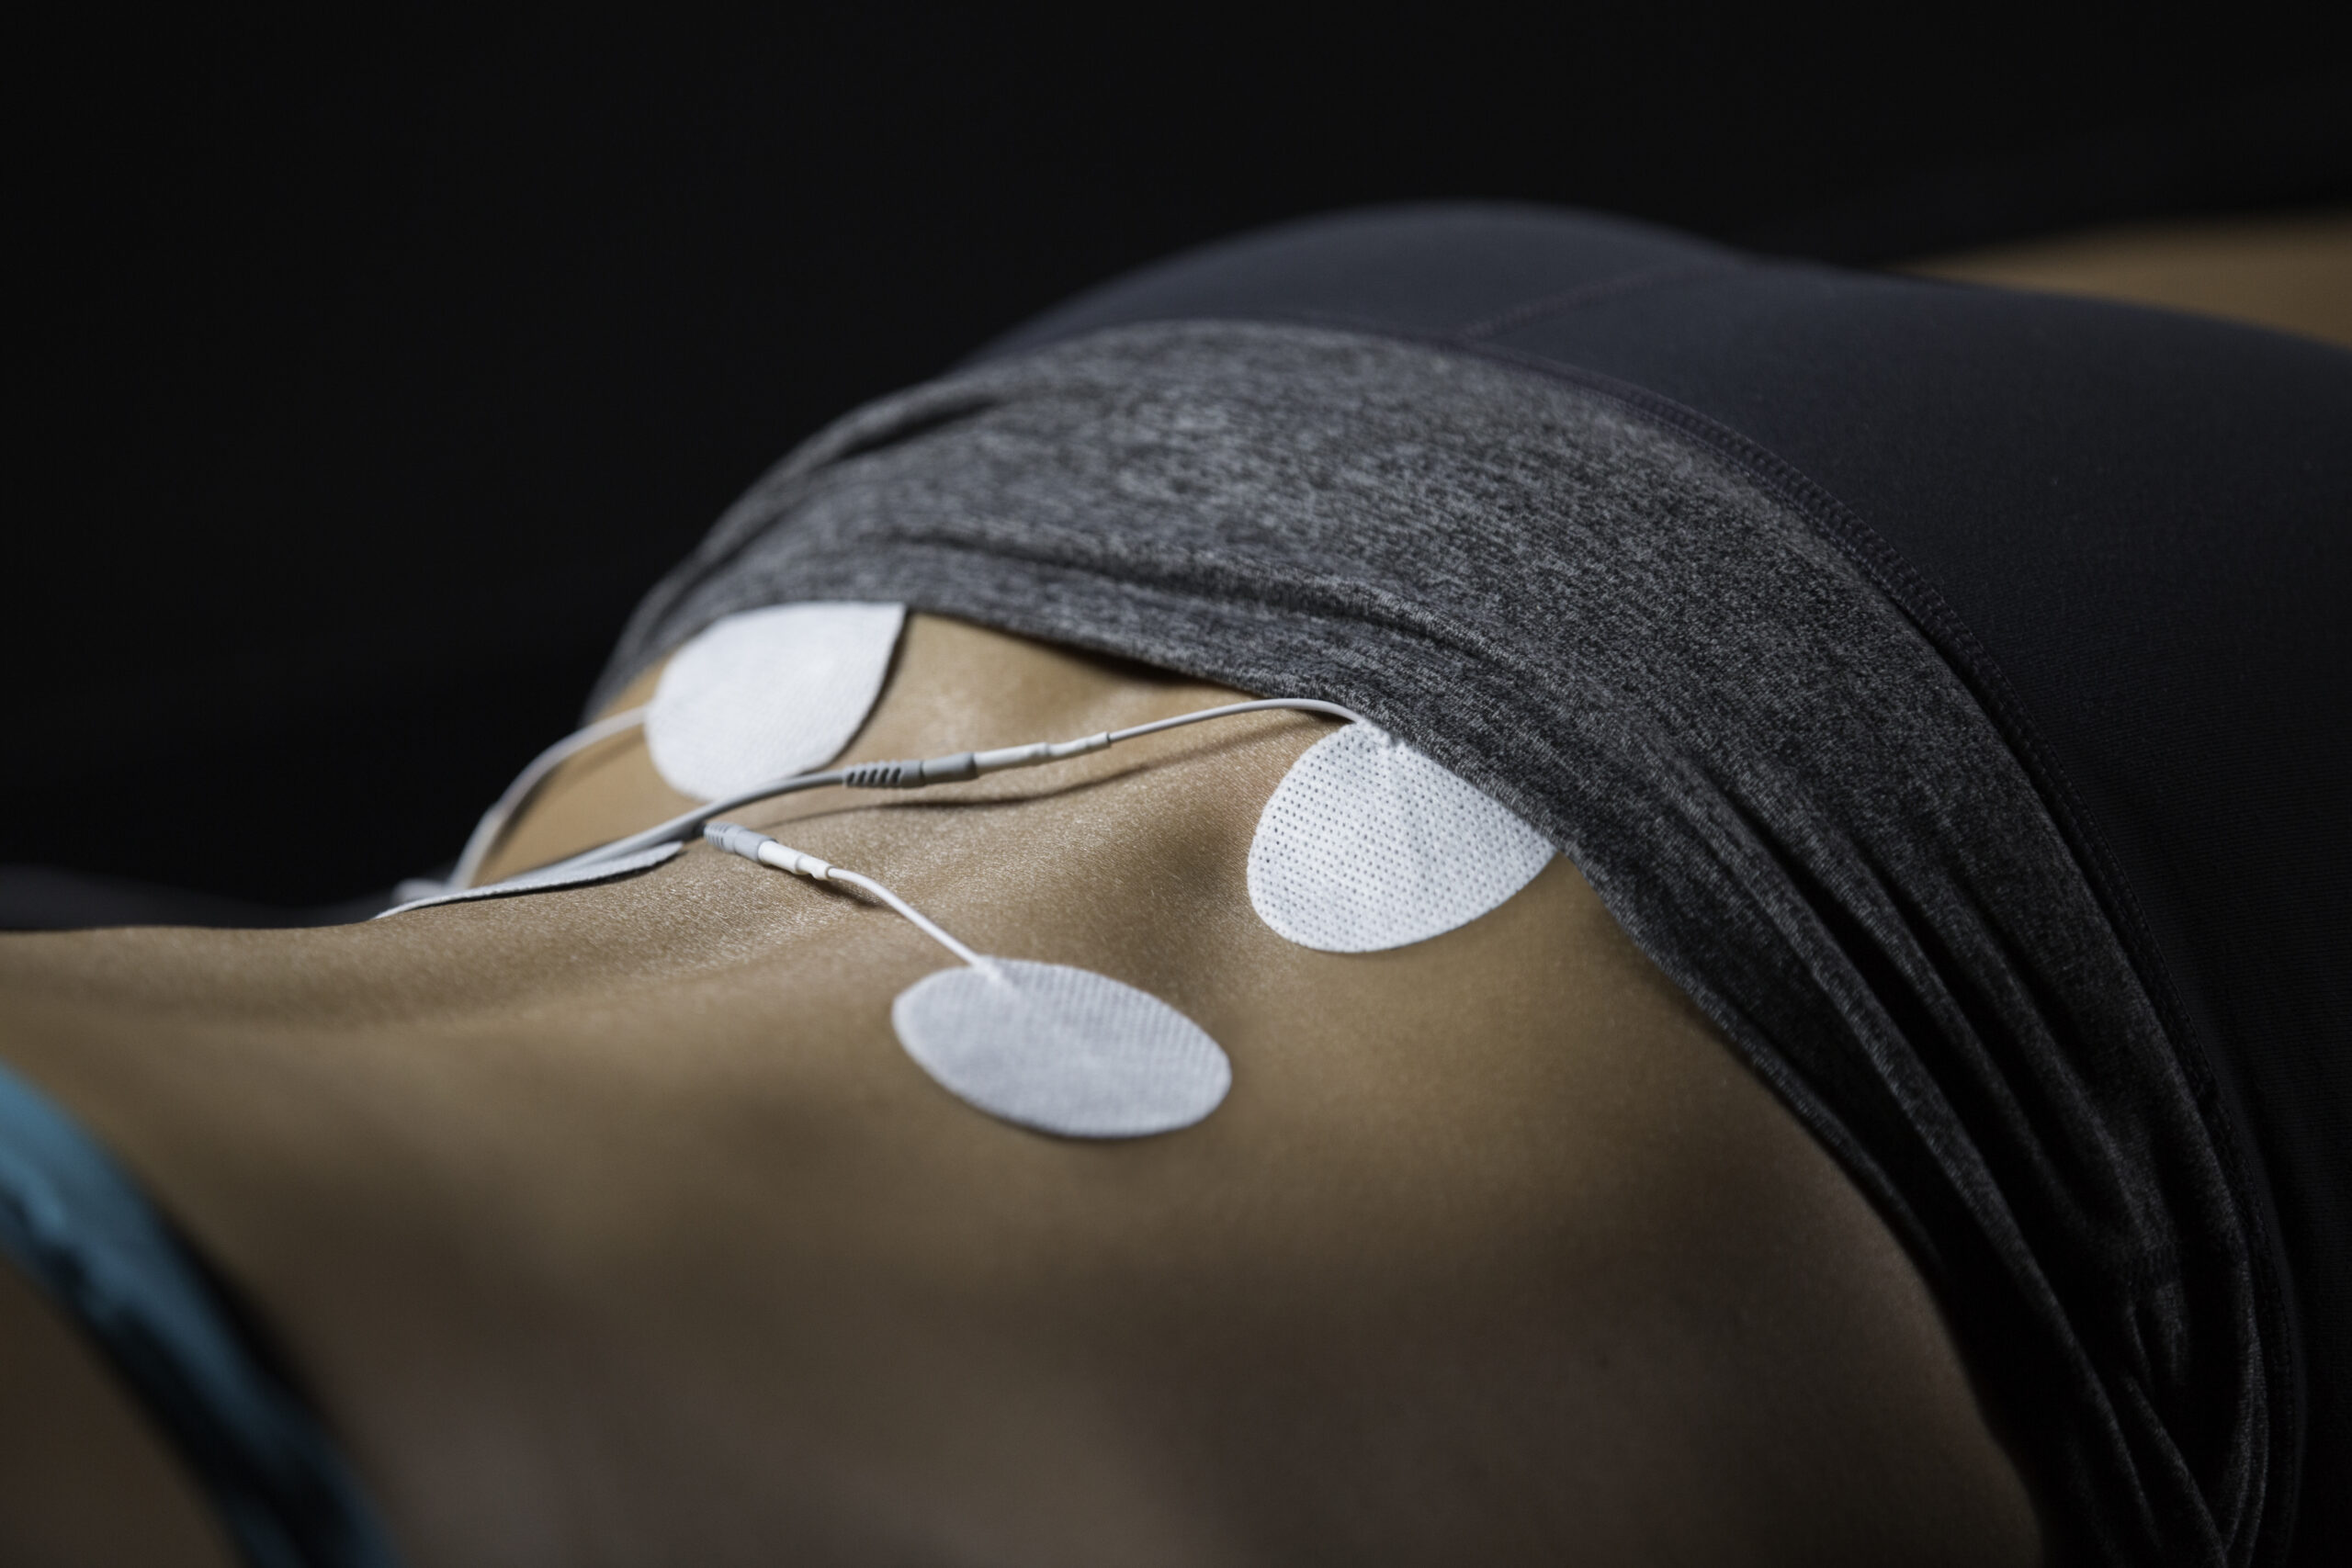 Pad Placement for Electrical Stimulation-Tips & Tricks with Dr. Kelly  Starrett, DPT